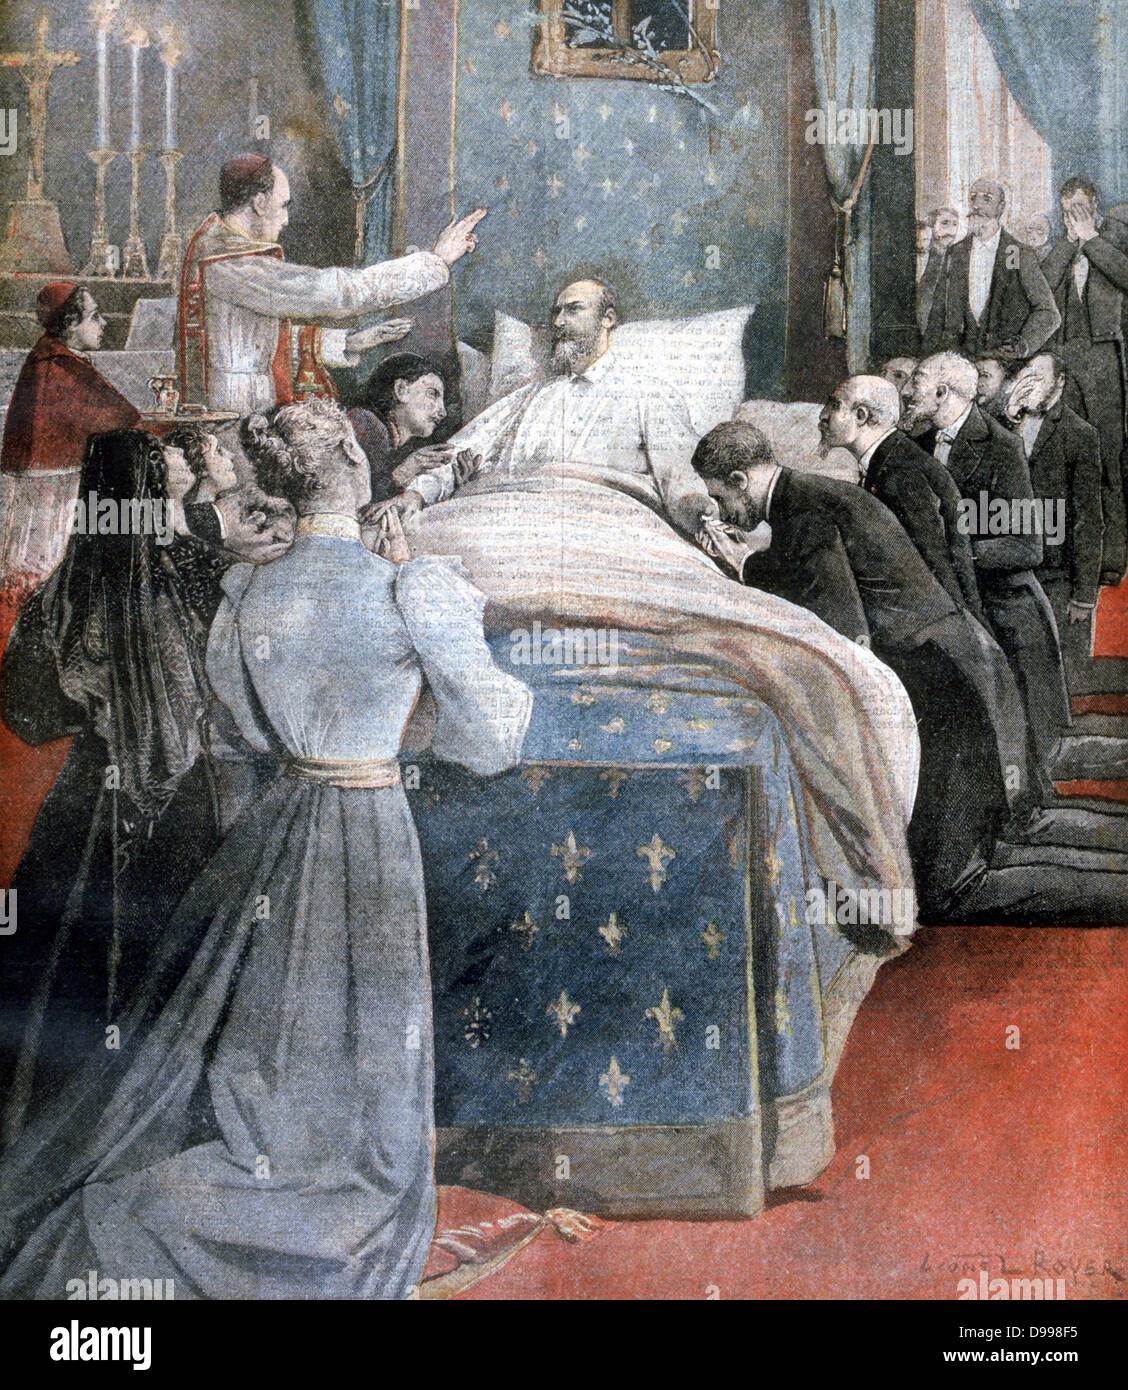 Philip of Orleans, Count of Paris (1838-1894), Grandson of Louis Philippe of France, Orleanist pretender to French throne, on his deathbed at Stowe House, Buckinghamshire, England. From 'Le Petit Journal', 17 September 1894. Stock Photo